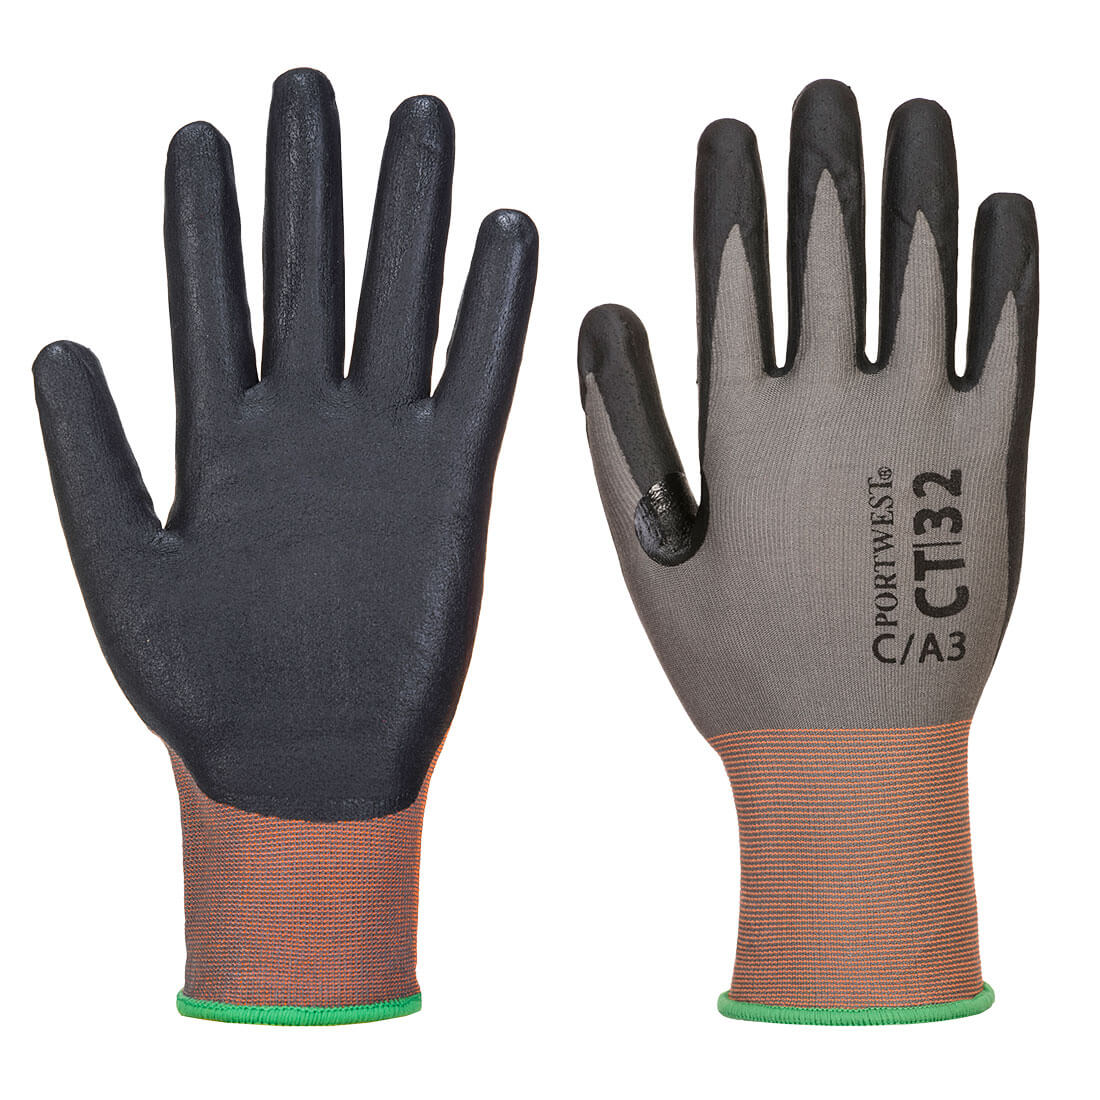 CT32  Portwest® CT MR18 A3 Cut Resistant Seamless Knit Micro Foam Nitrile Coated Work Gloves